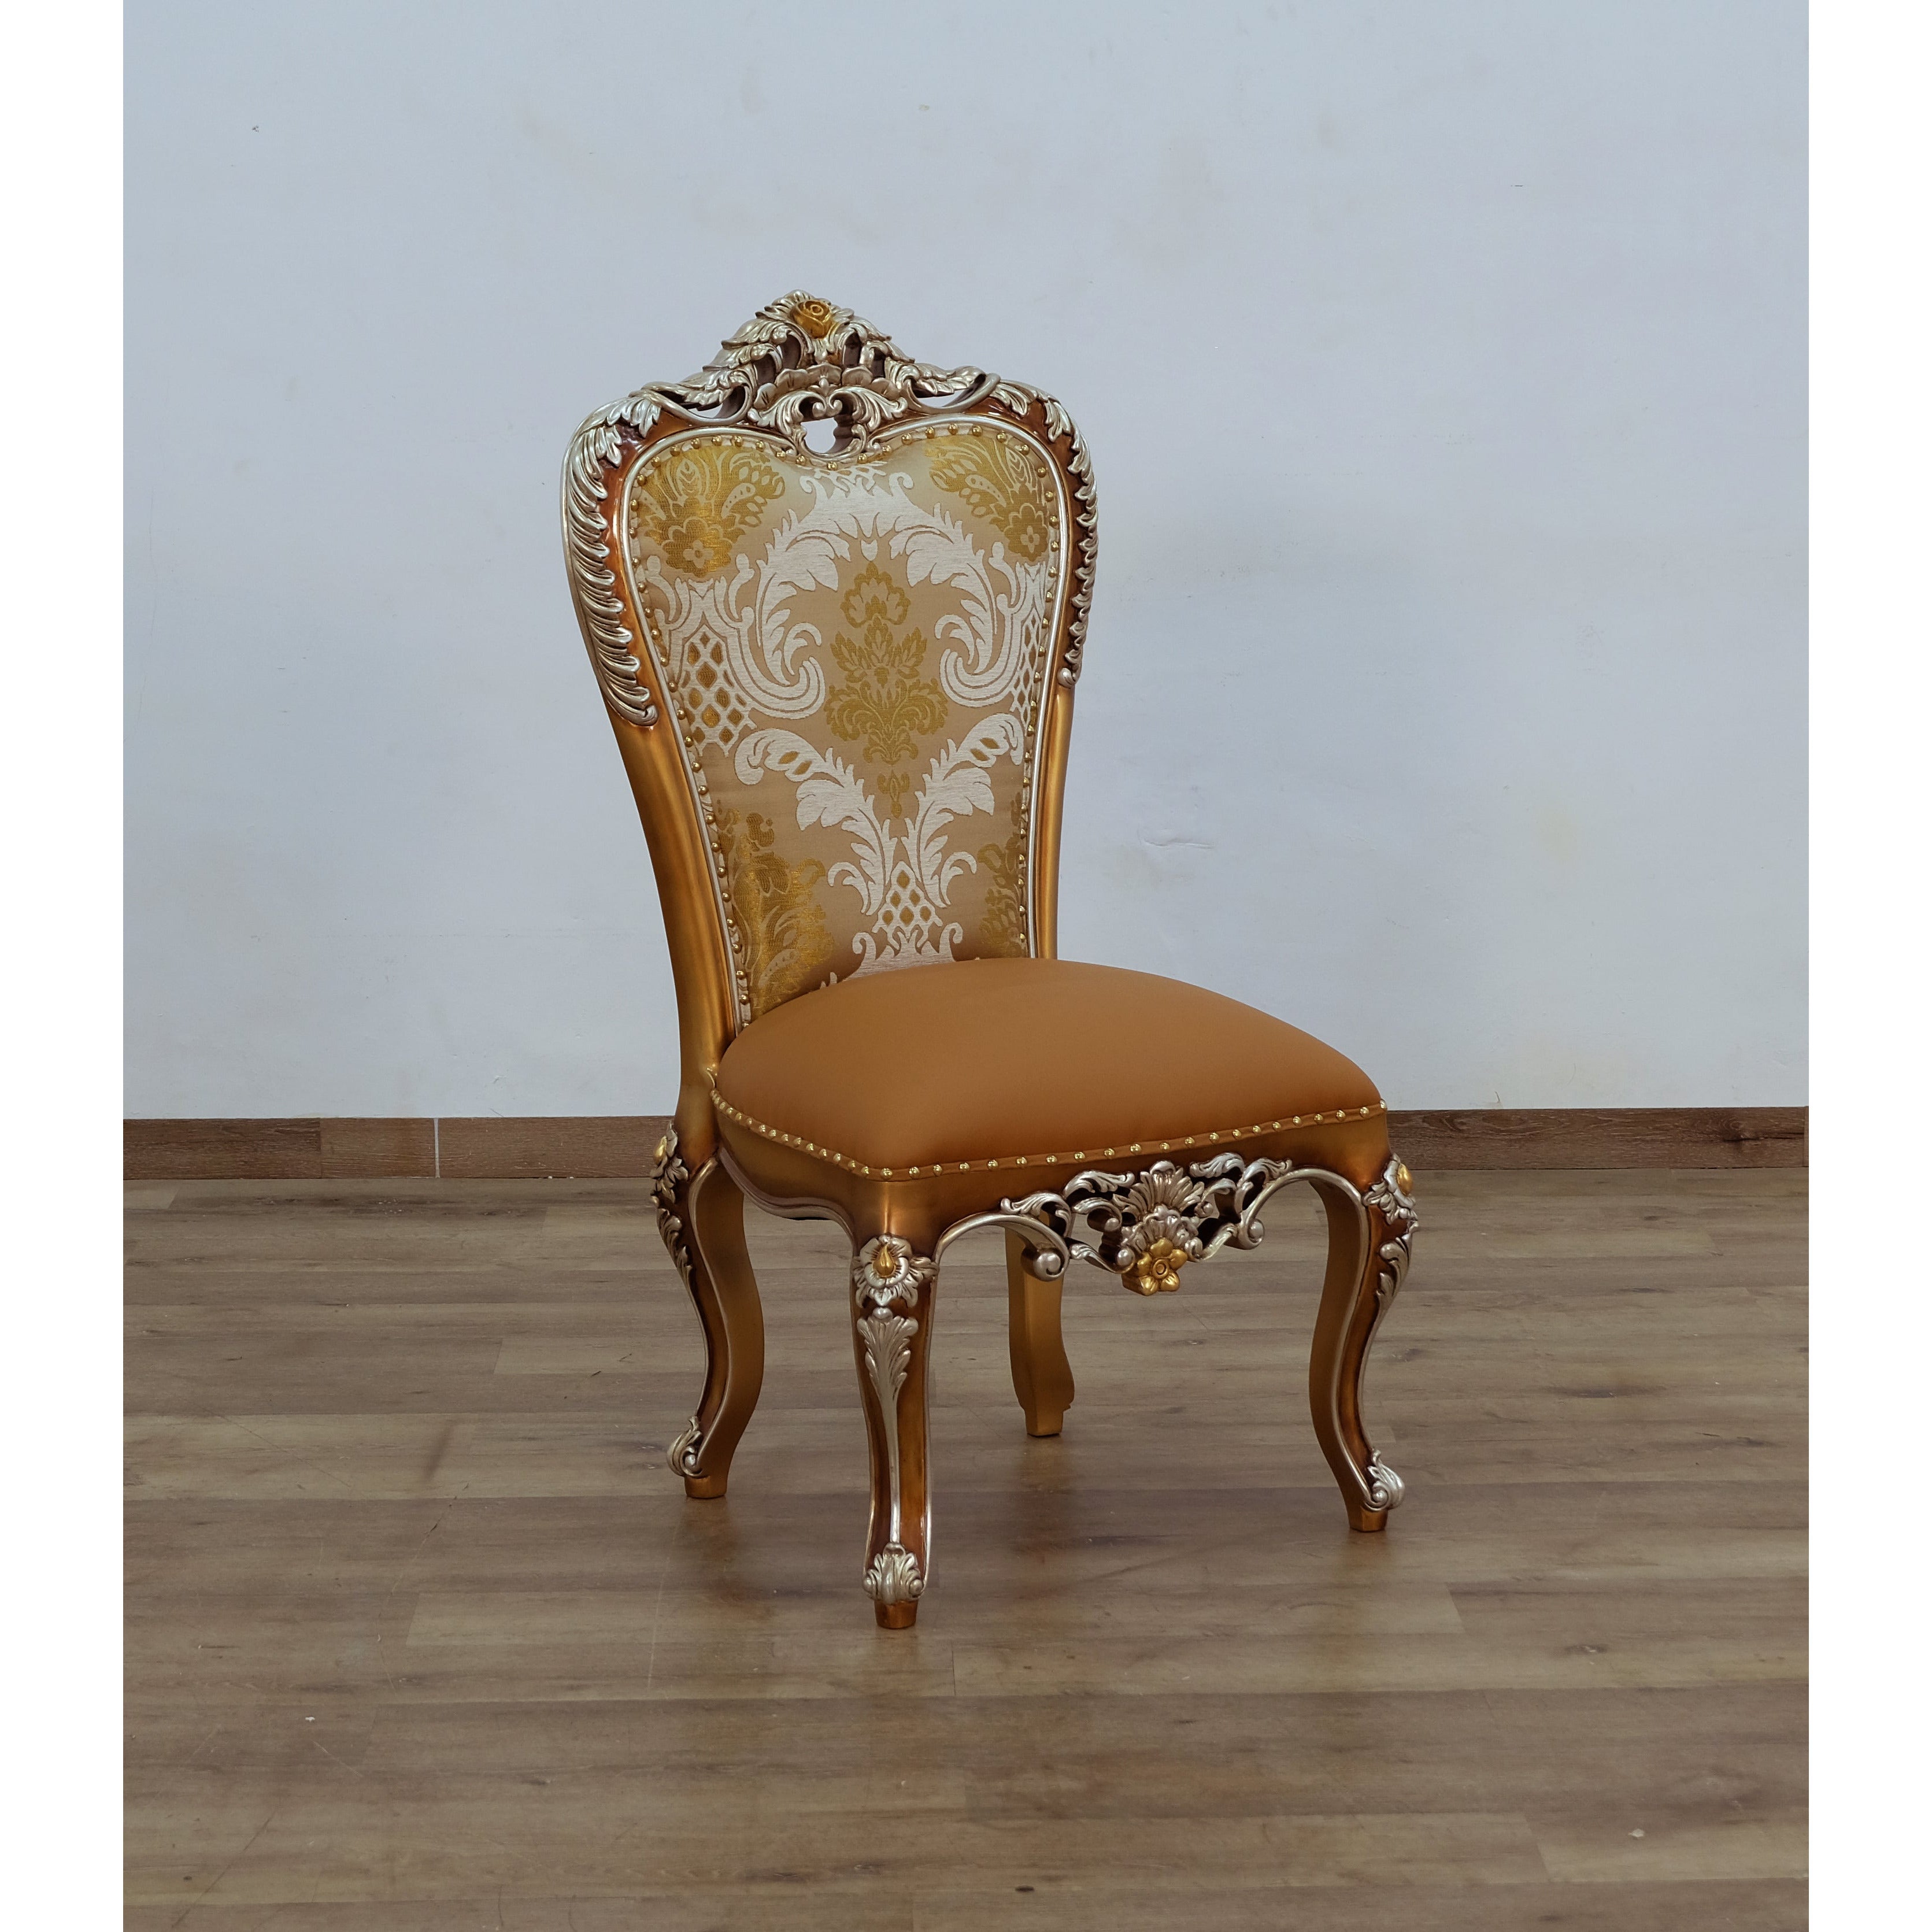 European Furniture - Saint Germain Dining Side Chair in Light Gold & Antique Silver Set of 2 - 35550SC - New Star Living